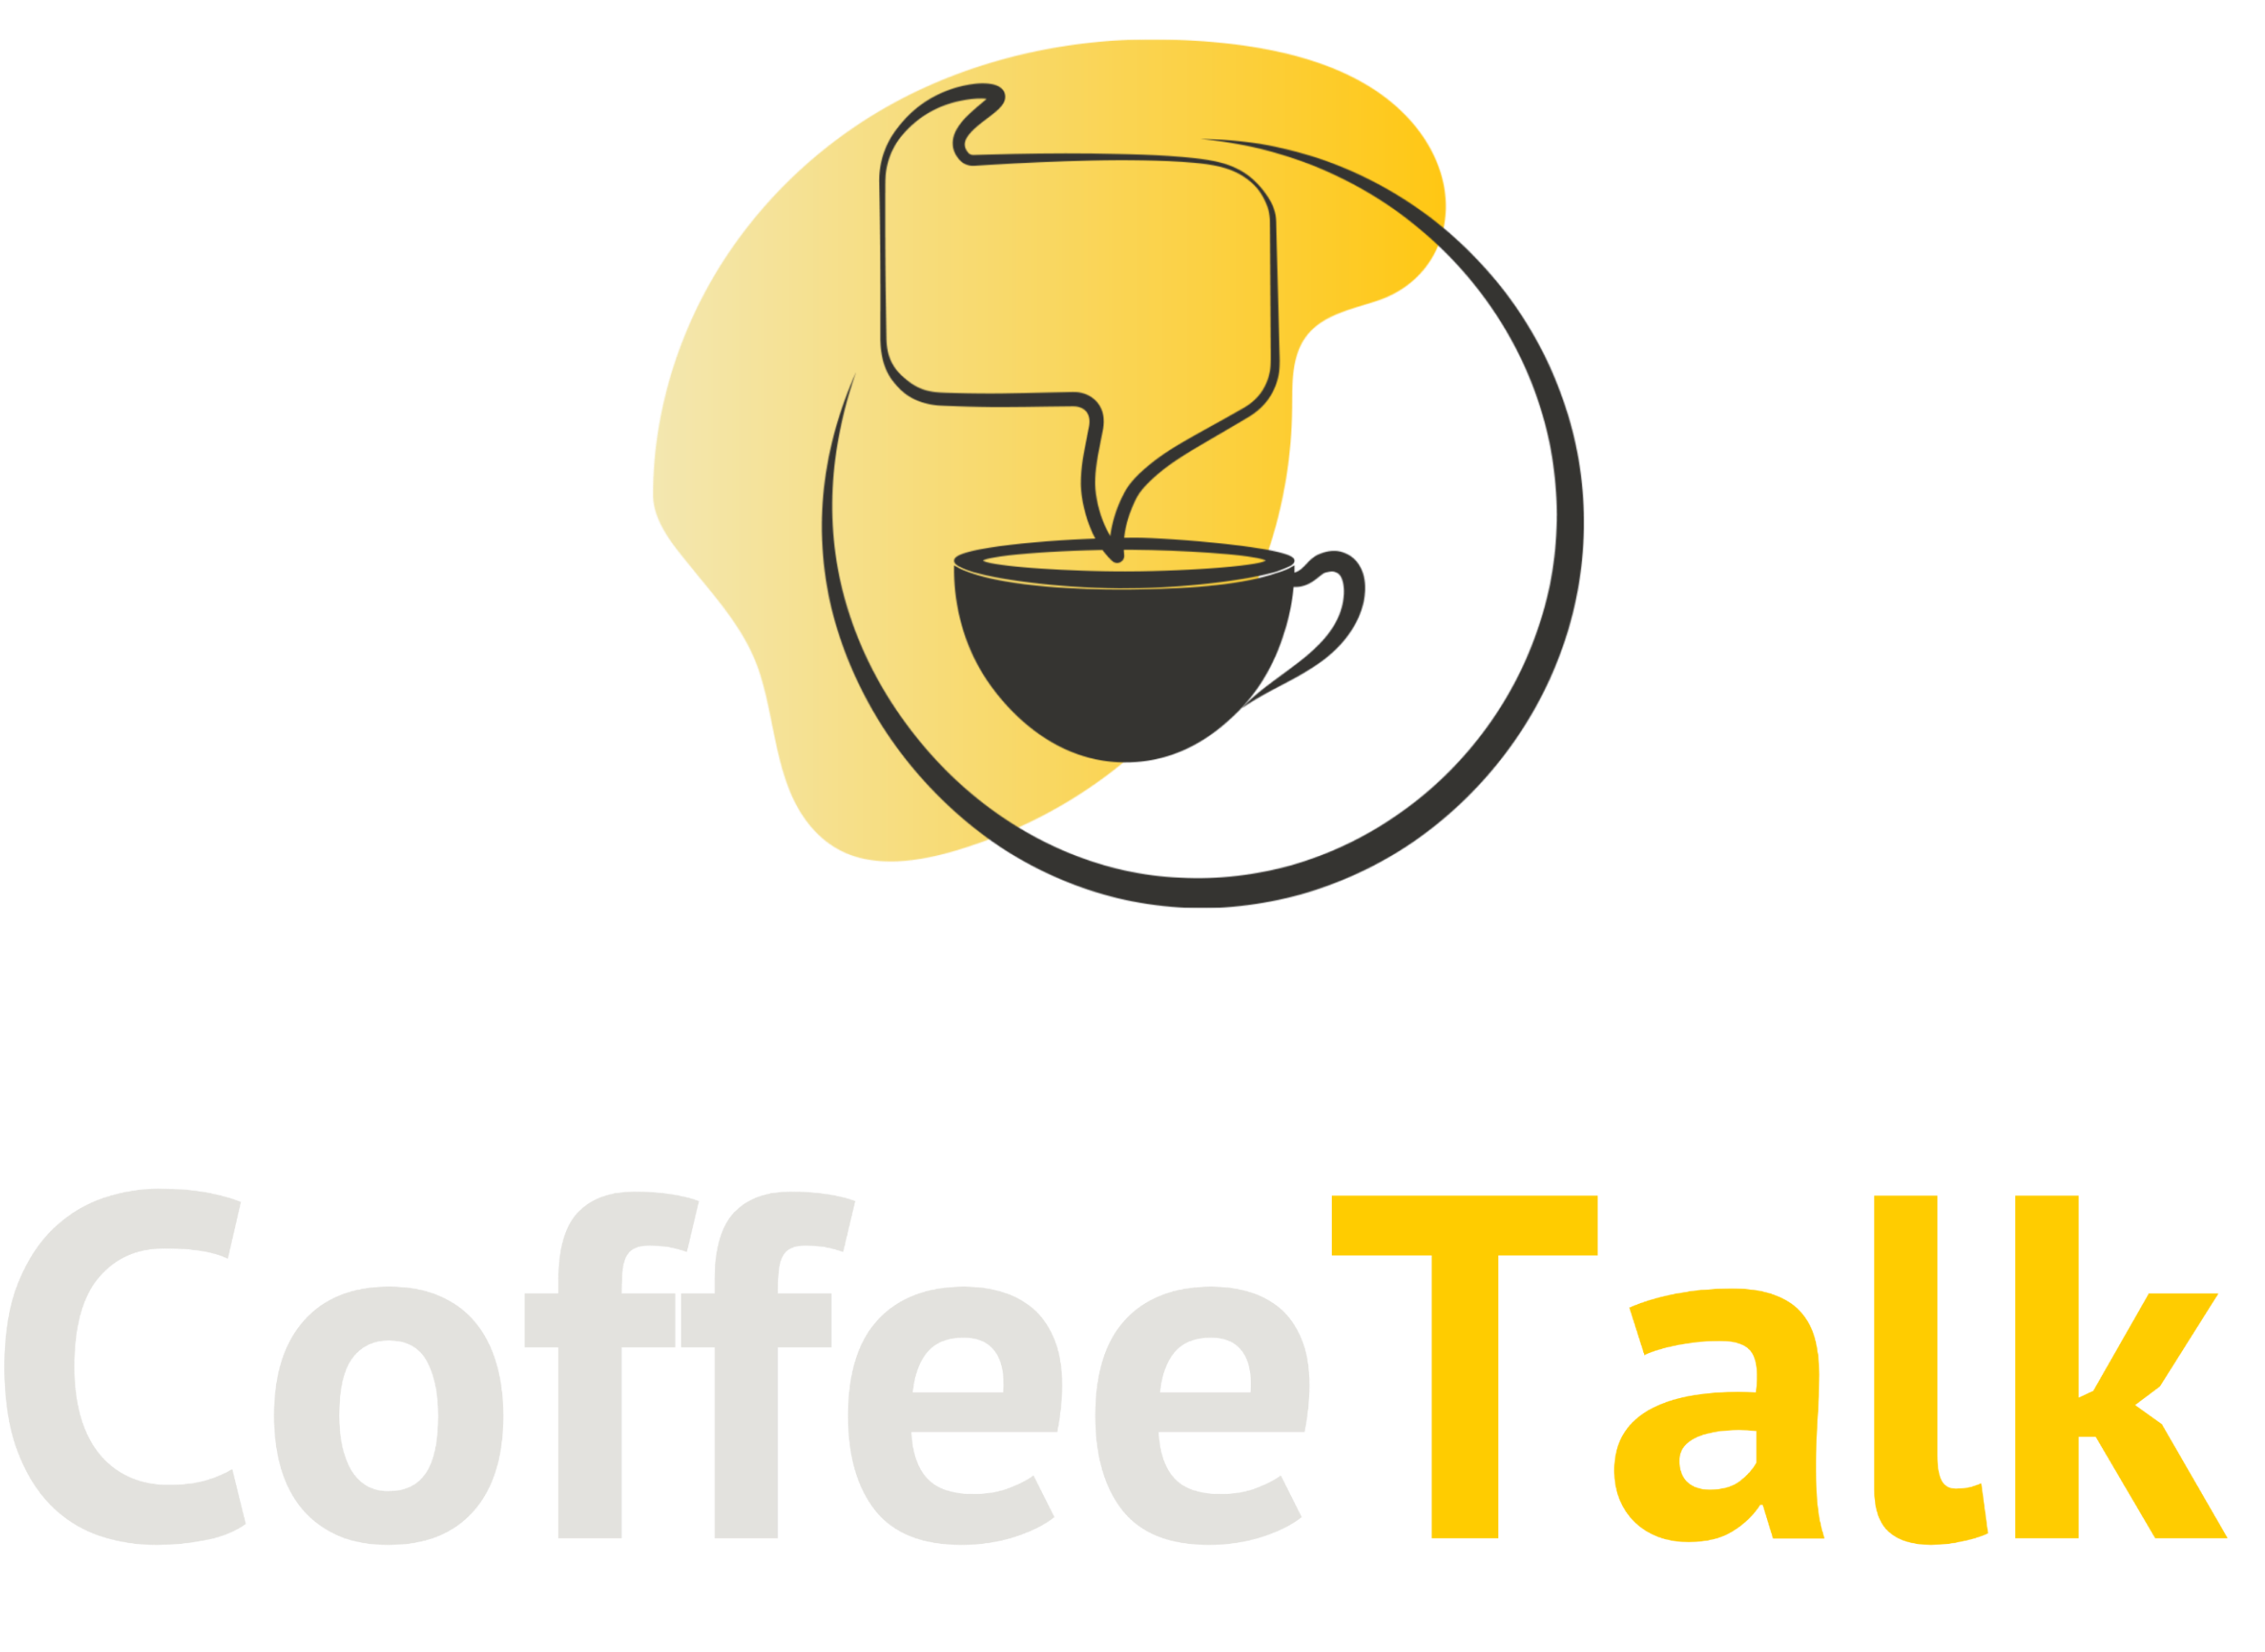 CoffeeTalk logo with a cup of coffee